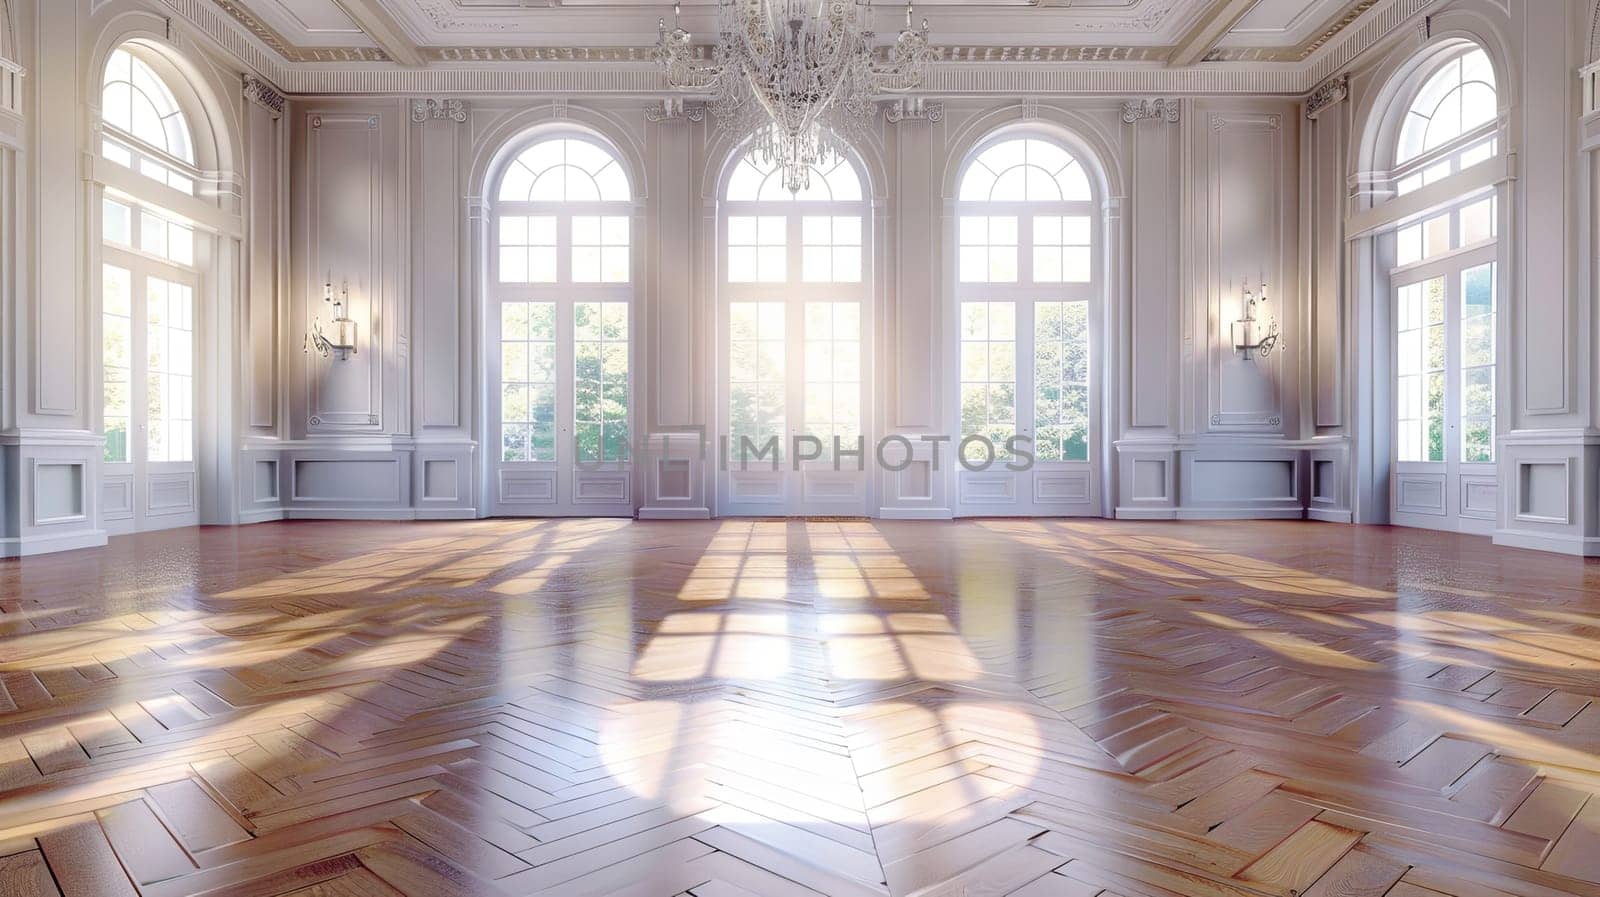 A vintage-style banquet hall with a chandelier and large windows, set in a big empty room with a parquet floor.